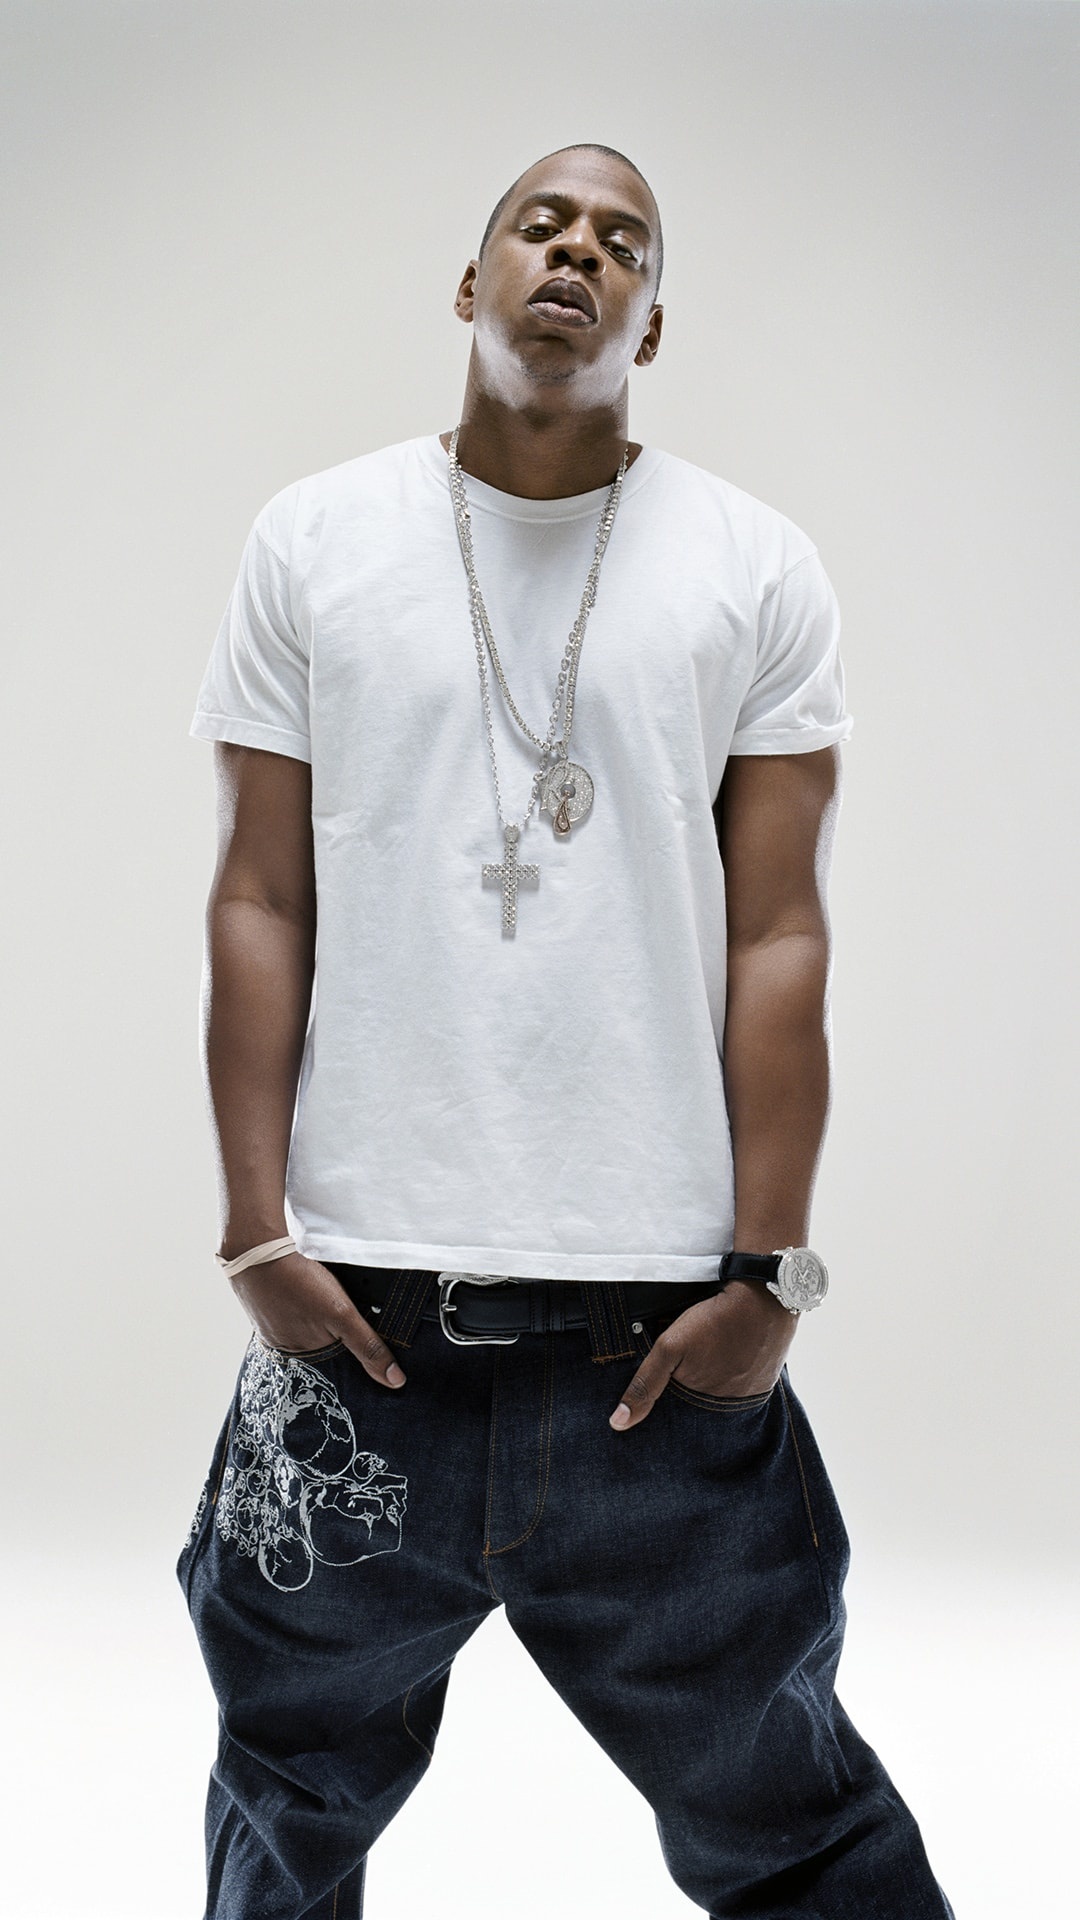 Jay-Z wallpapers, Stylish rapper, Celebrity images, Wallpaper collection, 1080x1920 Full HD Phone